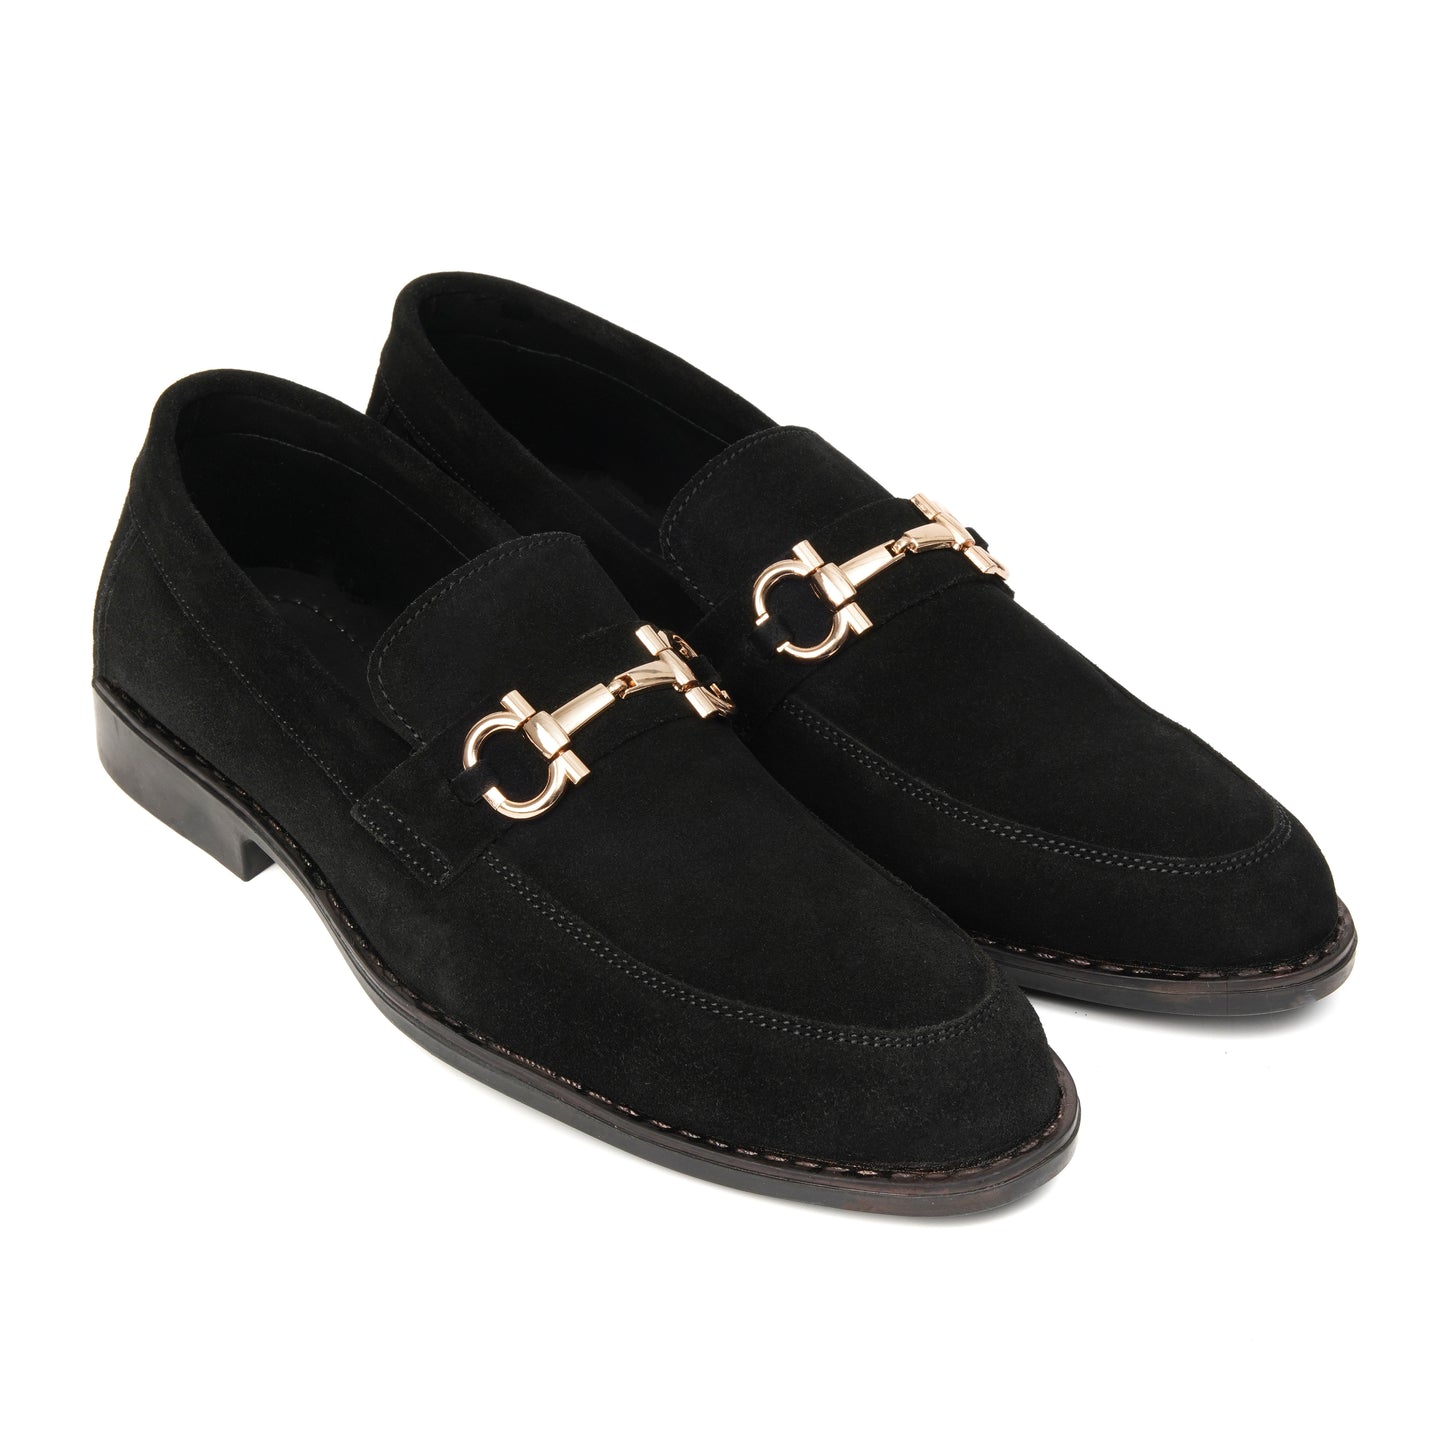 CS007-Black Cow Suede Loafers | Super Comfortable